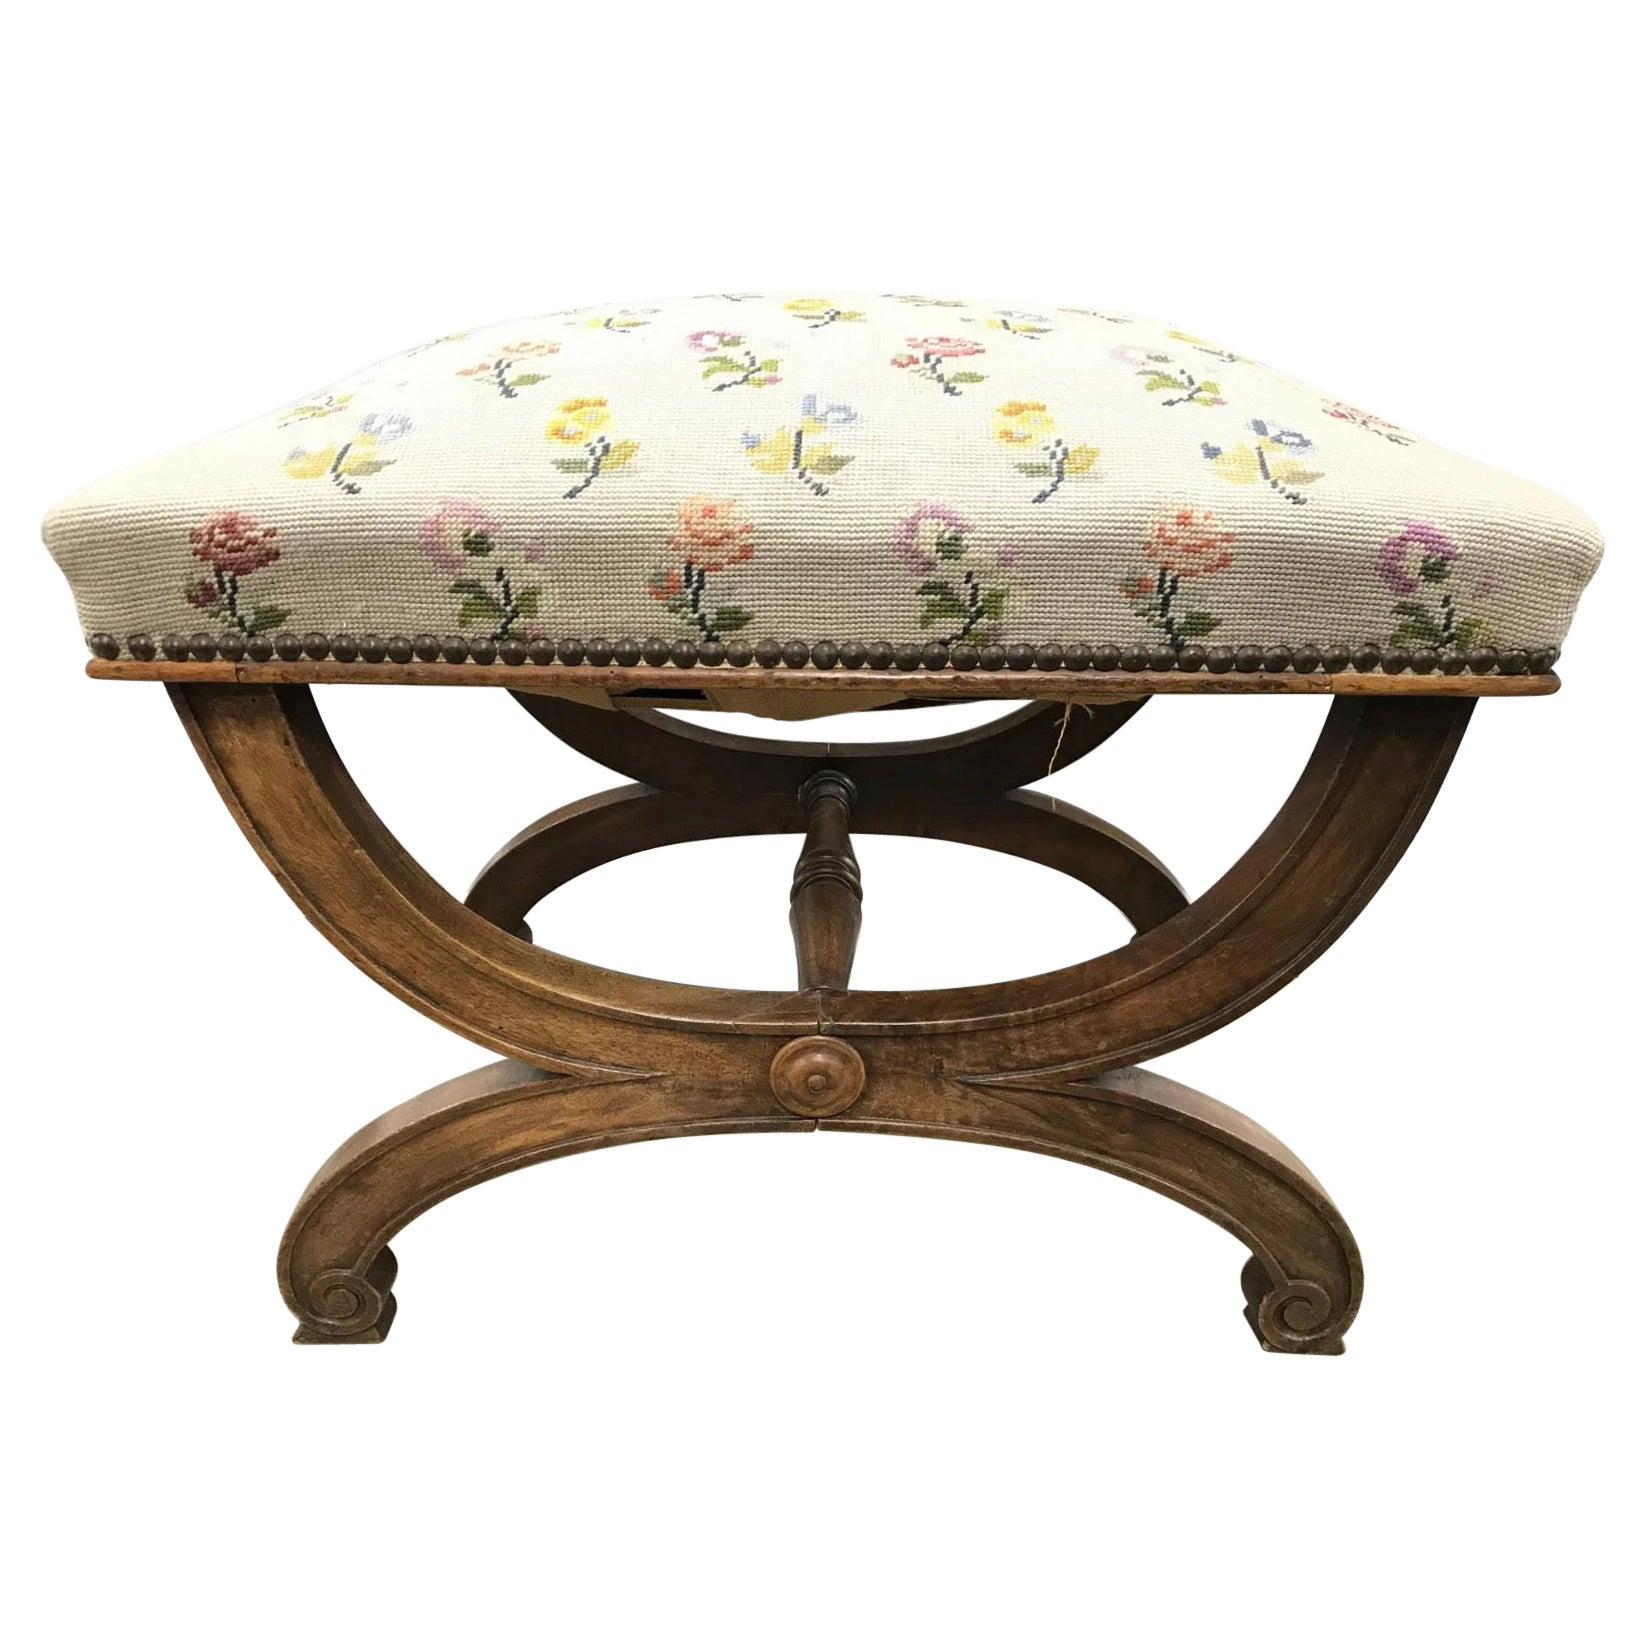 Vintage Neo-classical Style Needlepoint Upholstered Curule Bench